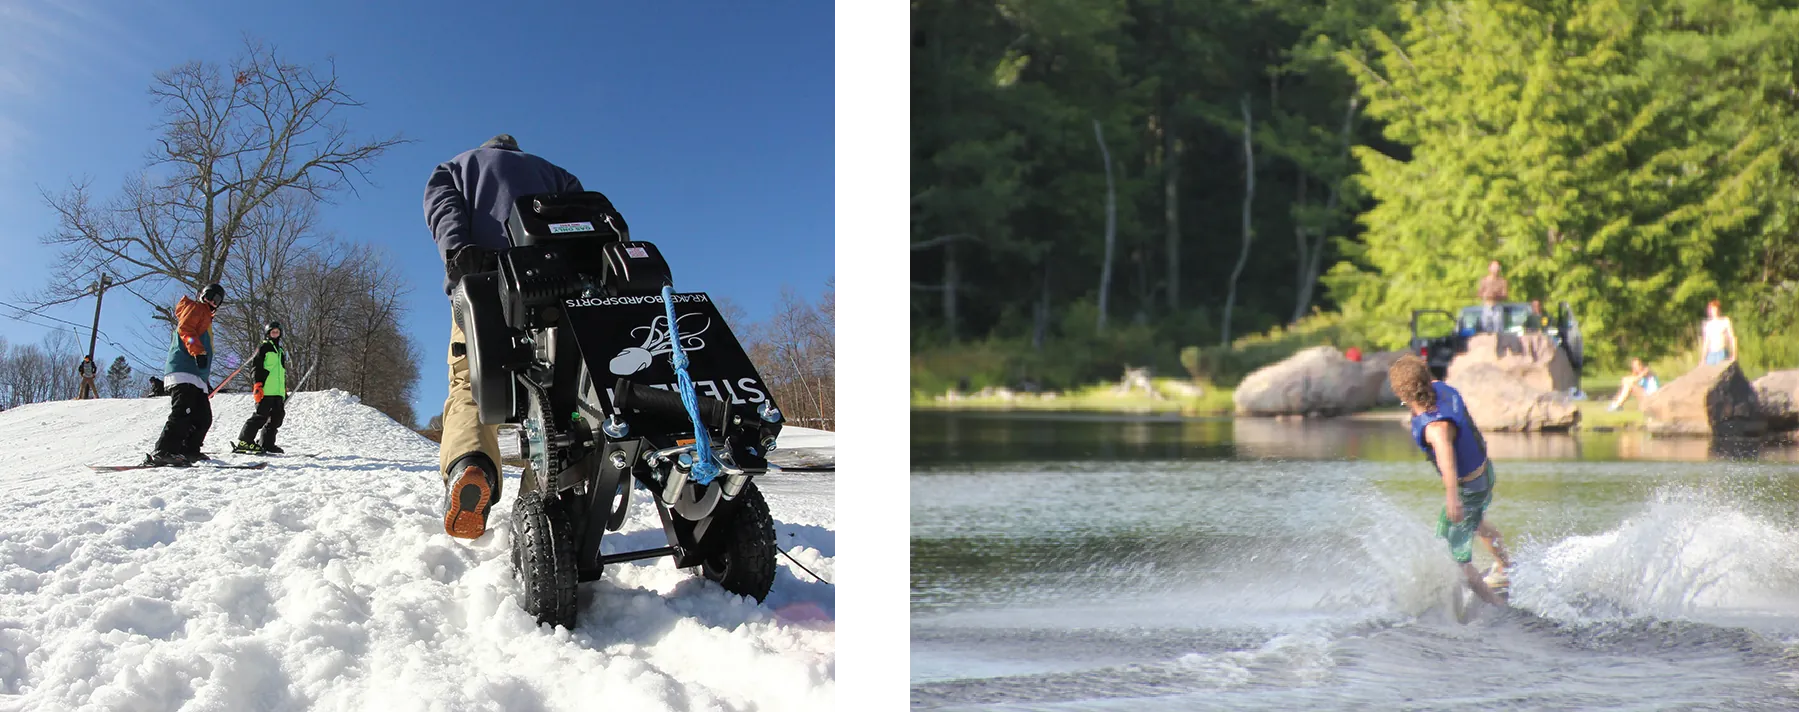 A photograph shows a person climbing a snow-covered hill carrying a winch on wheels. A photograph shows a person ski-boarding on a lake.